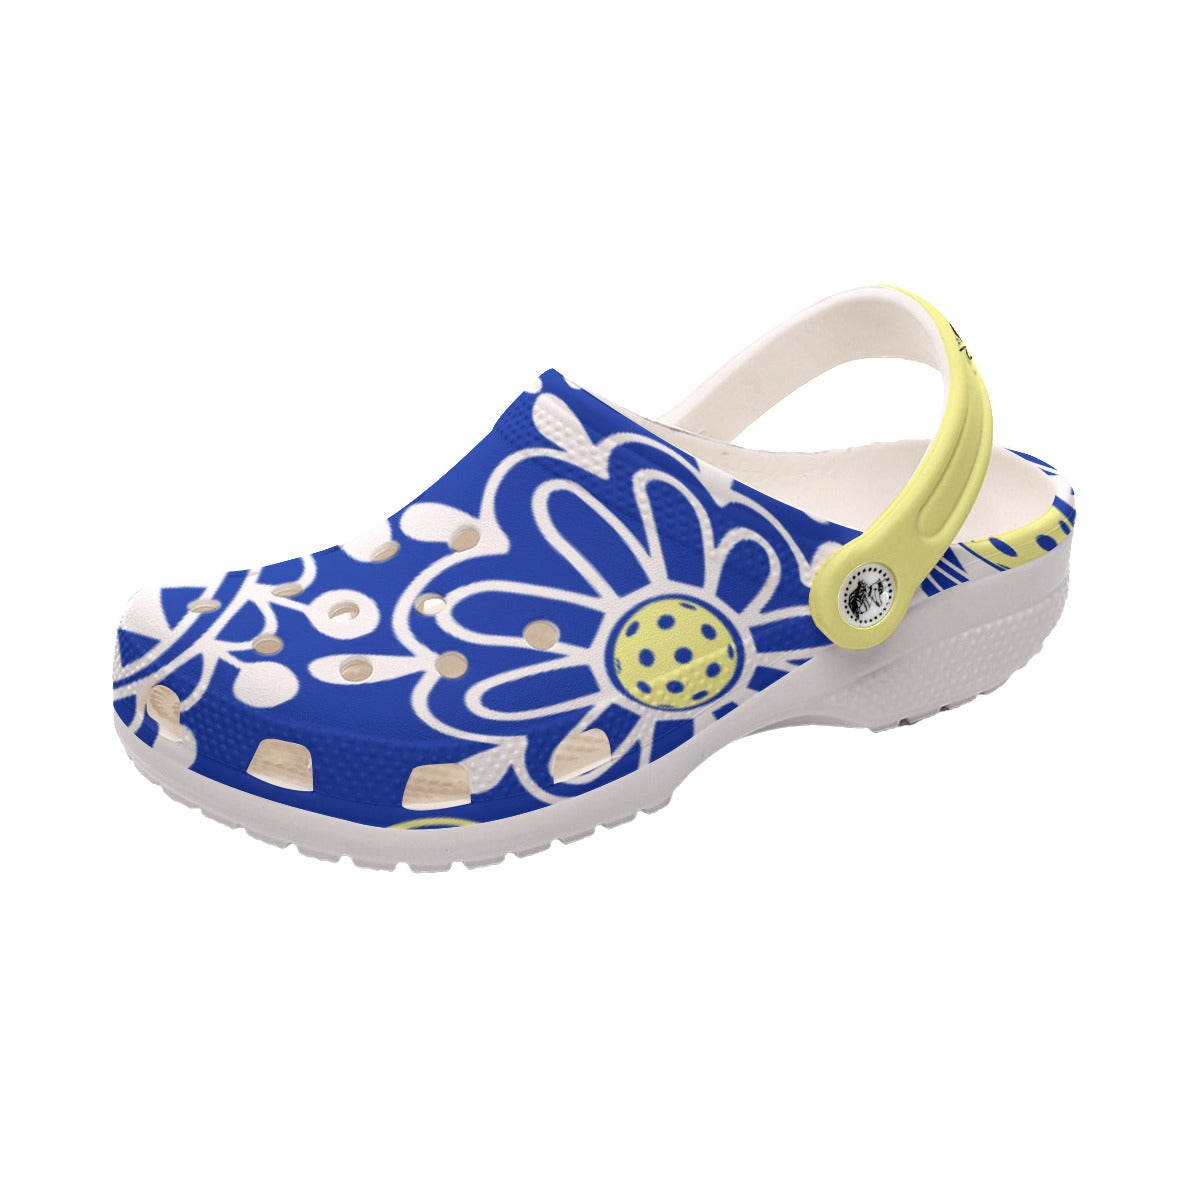 Coming Up Daisies - Blue/Yellow - Pickleball Women's Clogs by Dizzy Pickle